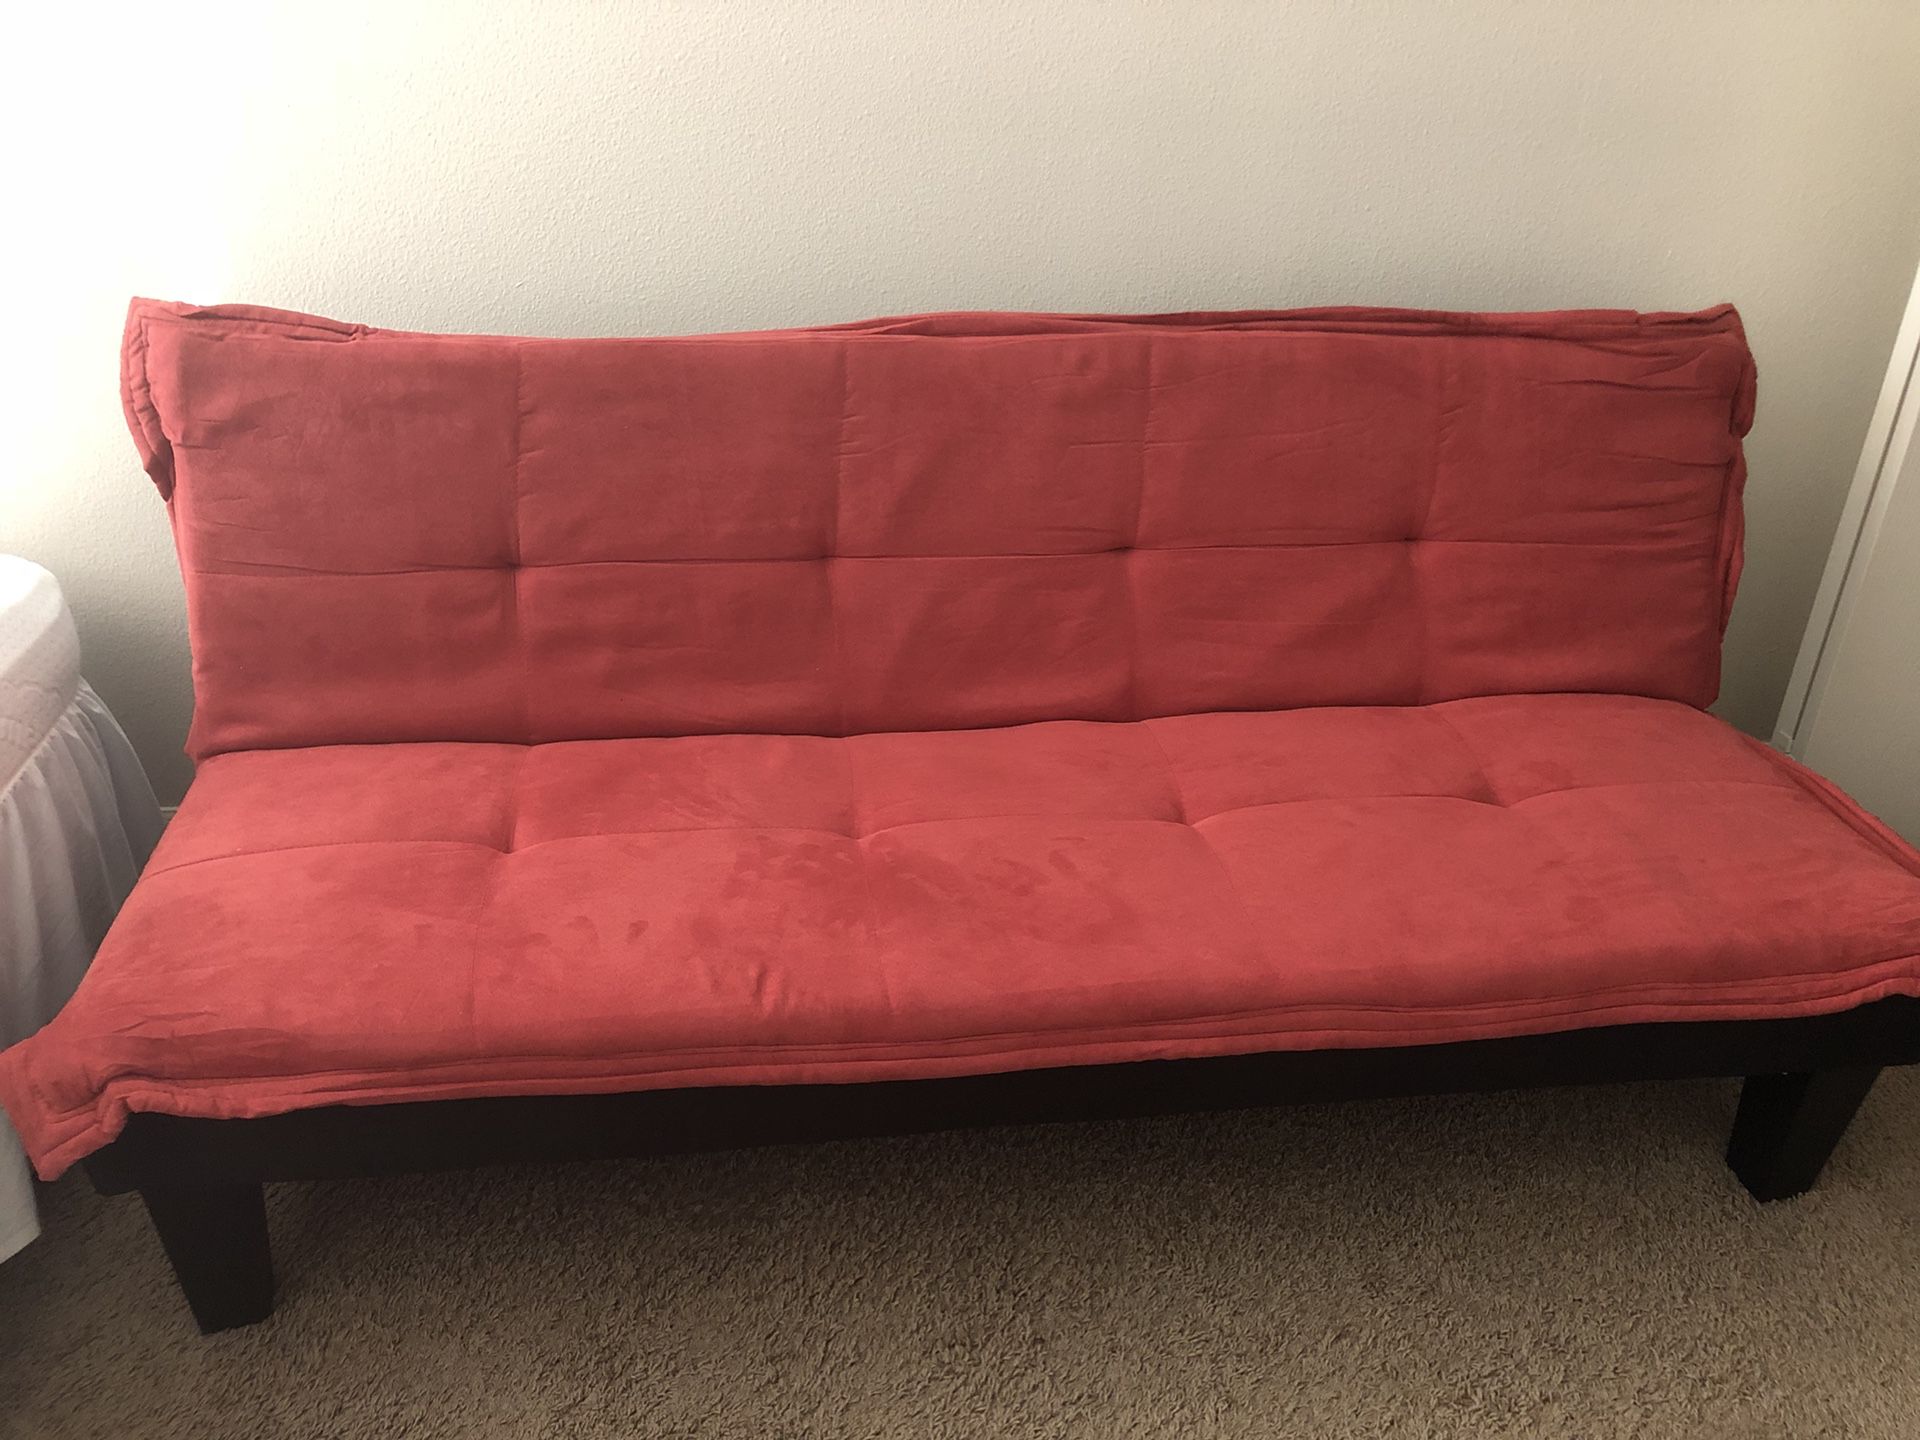 Red couch bed